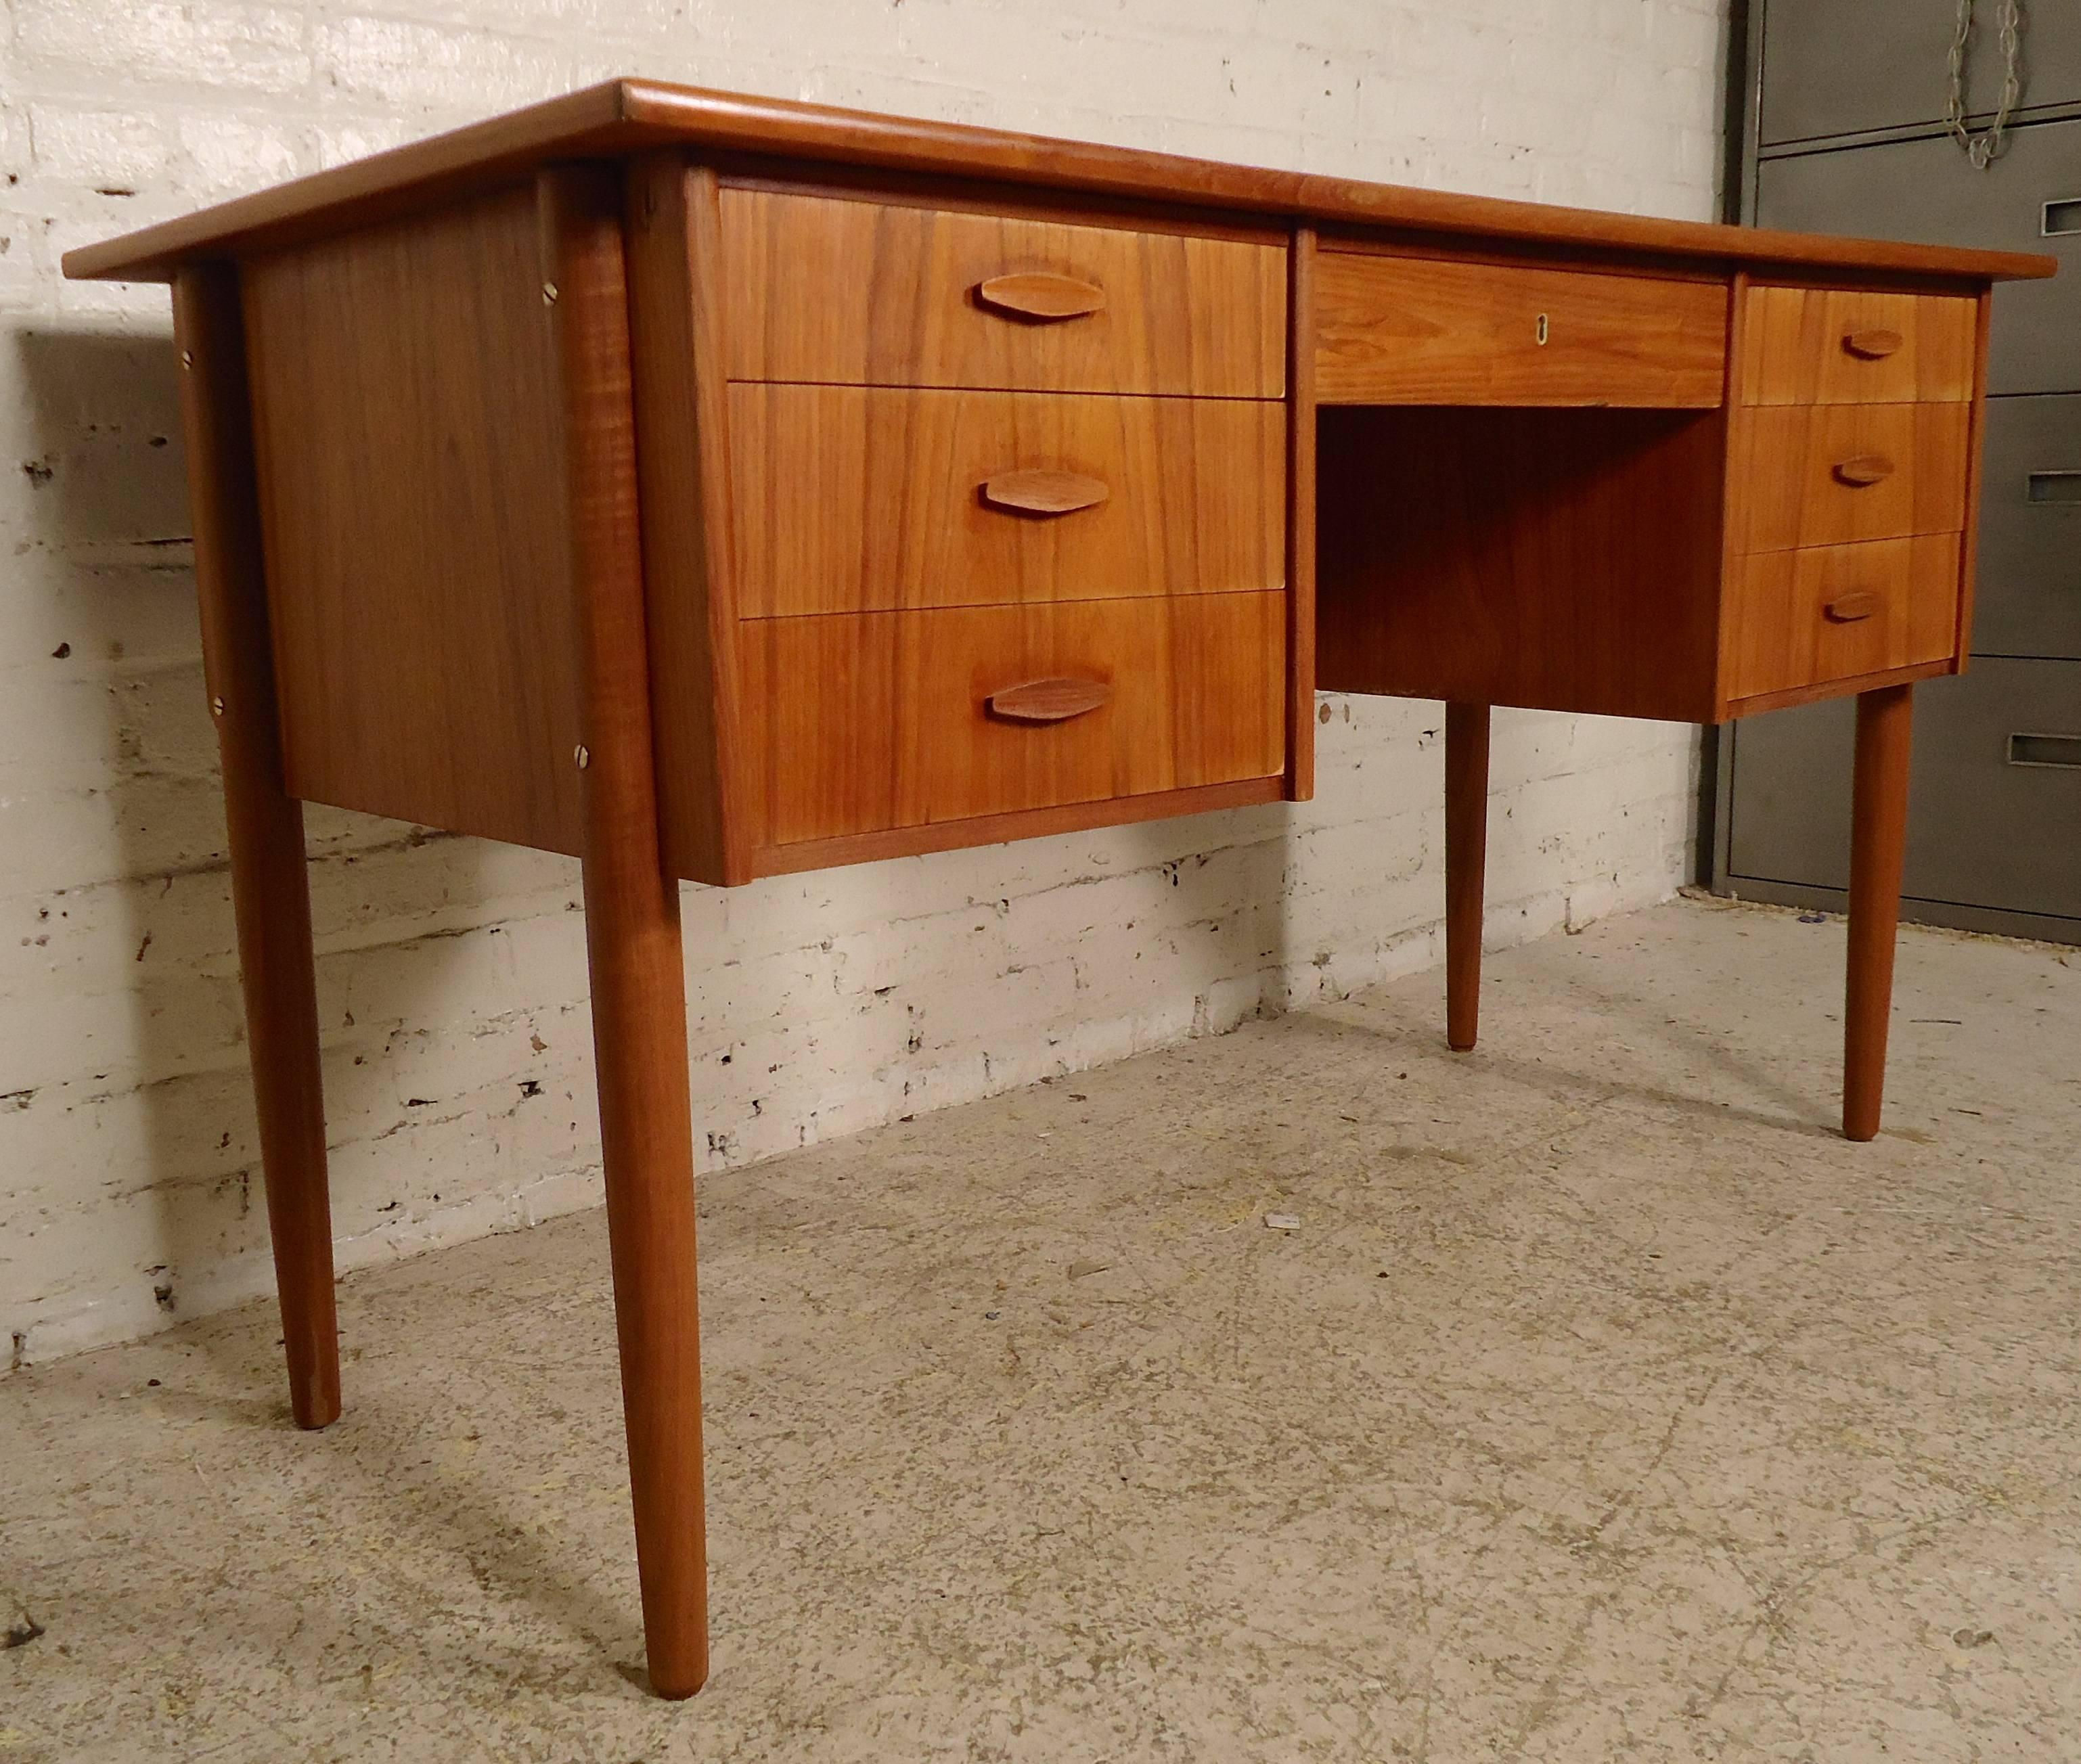 Simple and stylish Danish desk with teak grain, featuring seven drawers, wide top and long tapered legs. Sculpted handles on the dovetailed drawers and a finished back with storage add to the well-crafted Danish design.

Kneehole: 17.5 wide, 15